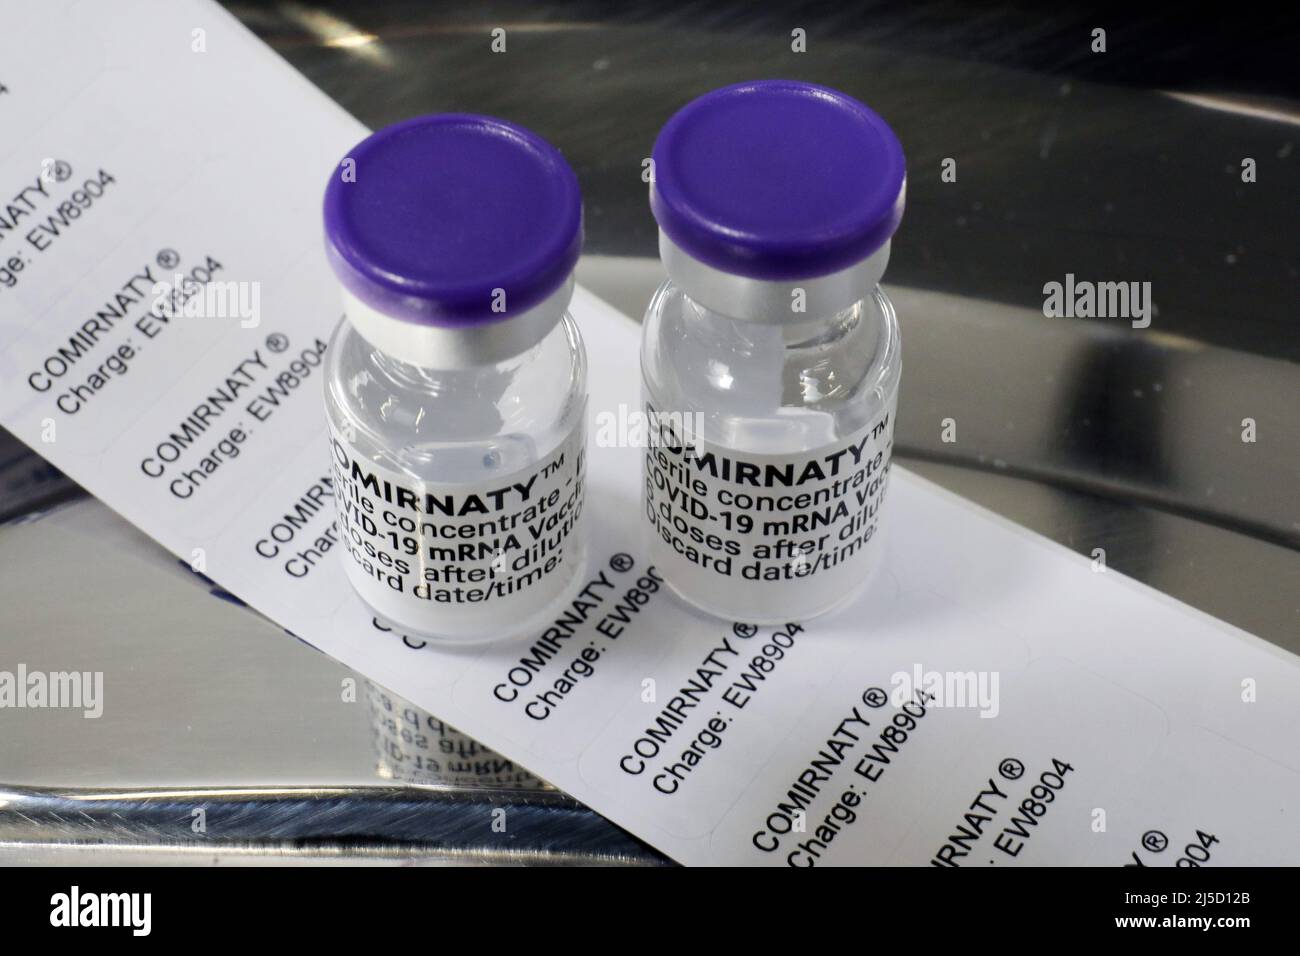 Rathenow, 14.04.2021 - Vaccine doses with Biontech Pfizer active ingredient Comirnaty with number of manufacturer batch. [automated translation] Stock Photo